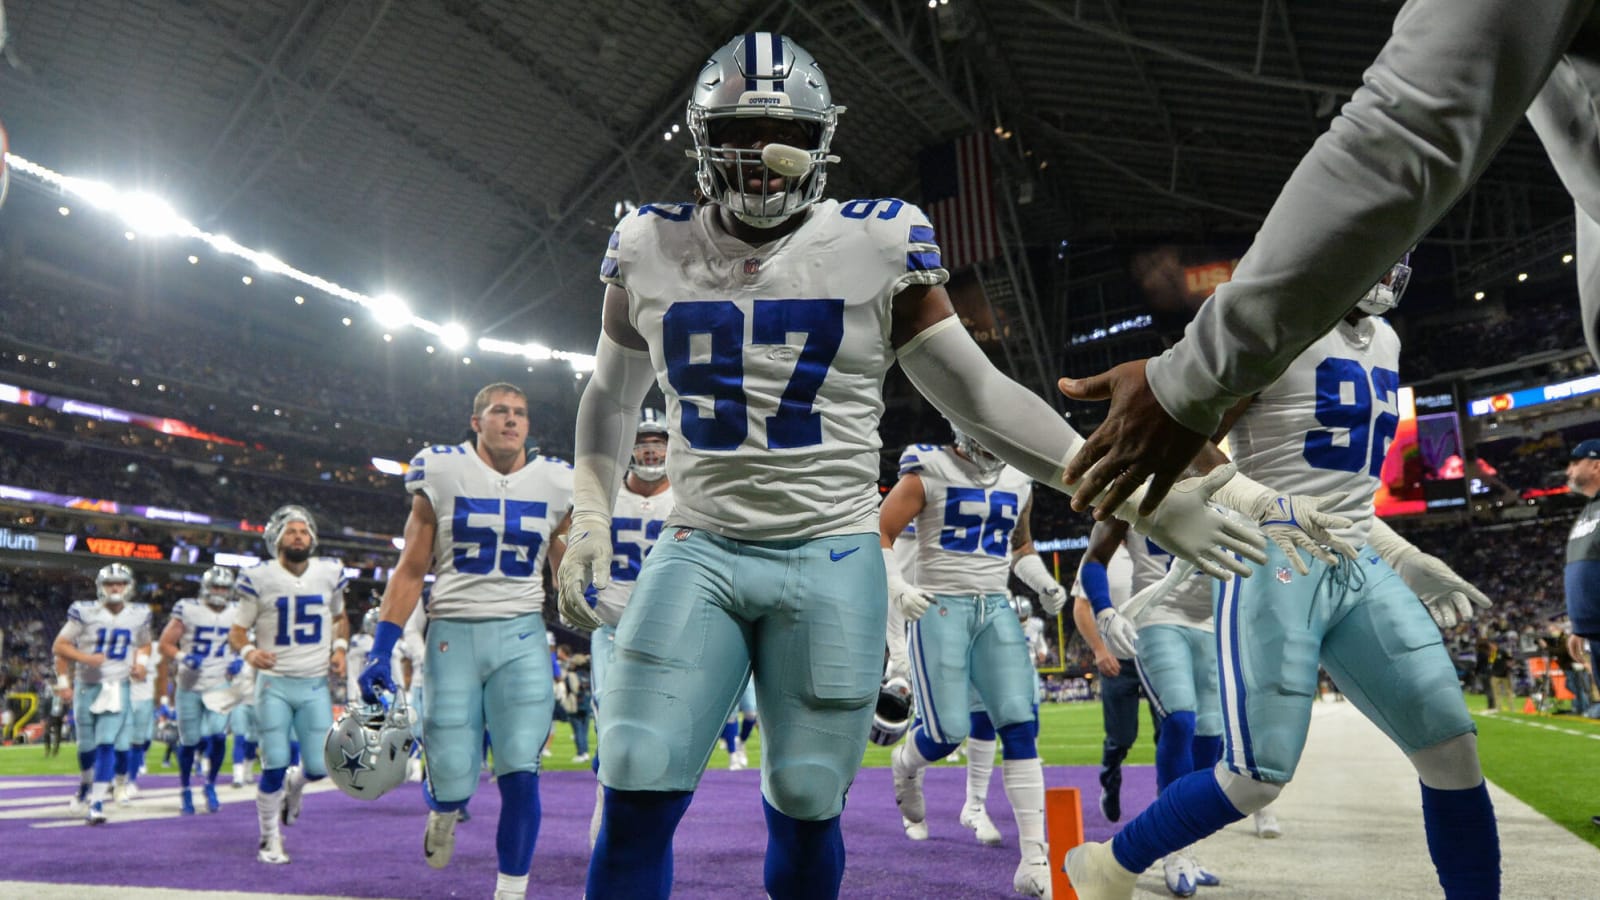 Rising Star: Osa Odighizuwa’s impact to the Cowboys defense can’t be overlooked